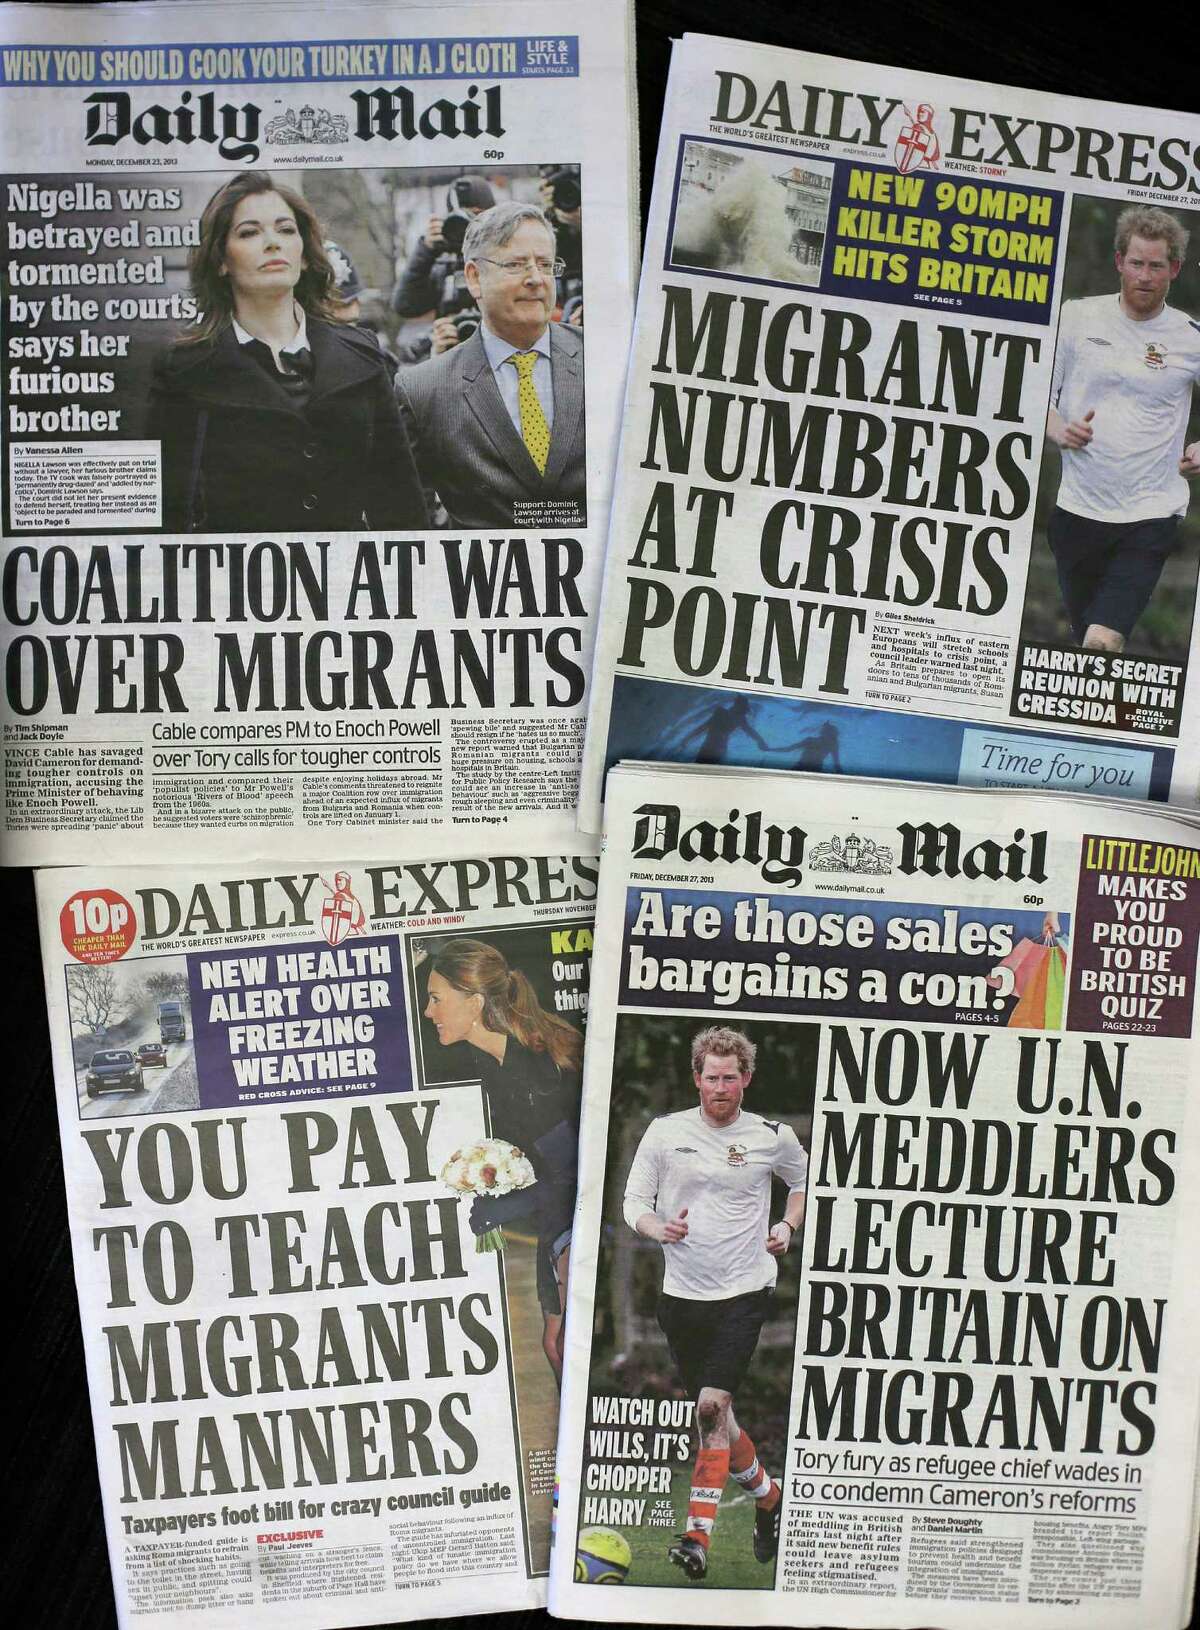 Recent editions of Britain's Daily Express and Daily Mail newspapers, featuring headlines about immigration, are photographed in London, Friday, Dec. 27, 2013. For months, Britain's tabloids have repeatedly warned of the horrors they believe will ensue after Jan. 1, 2014 when work restrictions will be lifted across the European Union for migrants from Romania and Bulgaria â?” two of the trading bloc's newest members. Those changes, the papers claim, will unleash a mass exodus of the poor and unemployed from the two eastern European countries to Britain. (AP Photo/Alastair Grant)